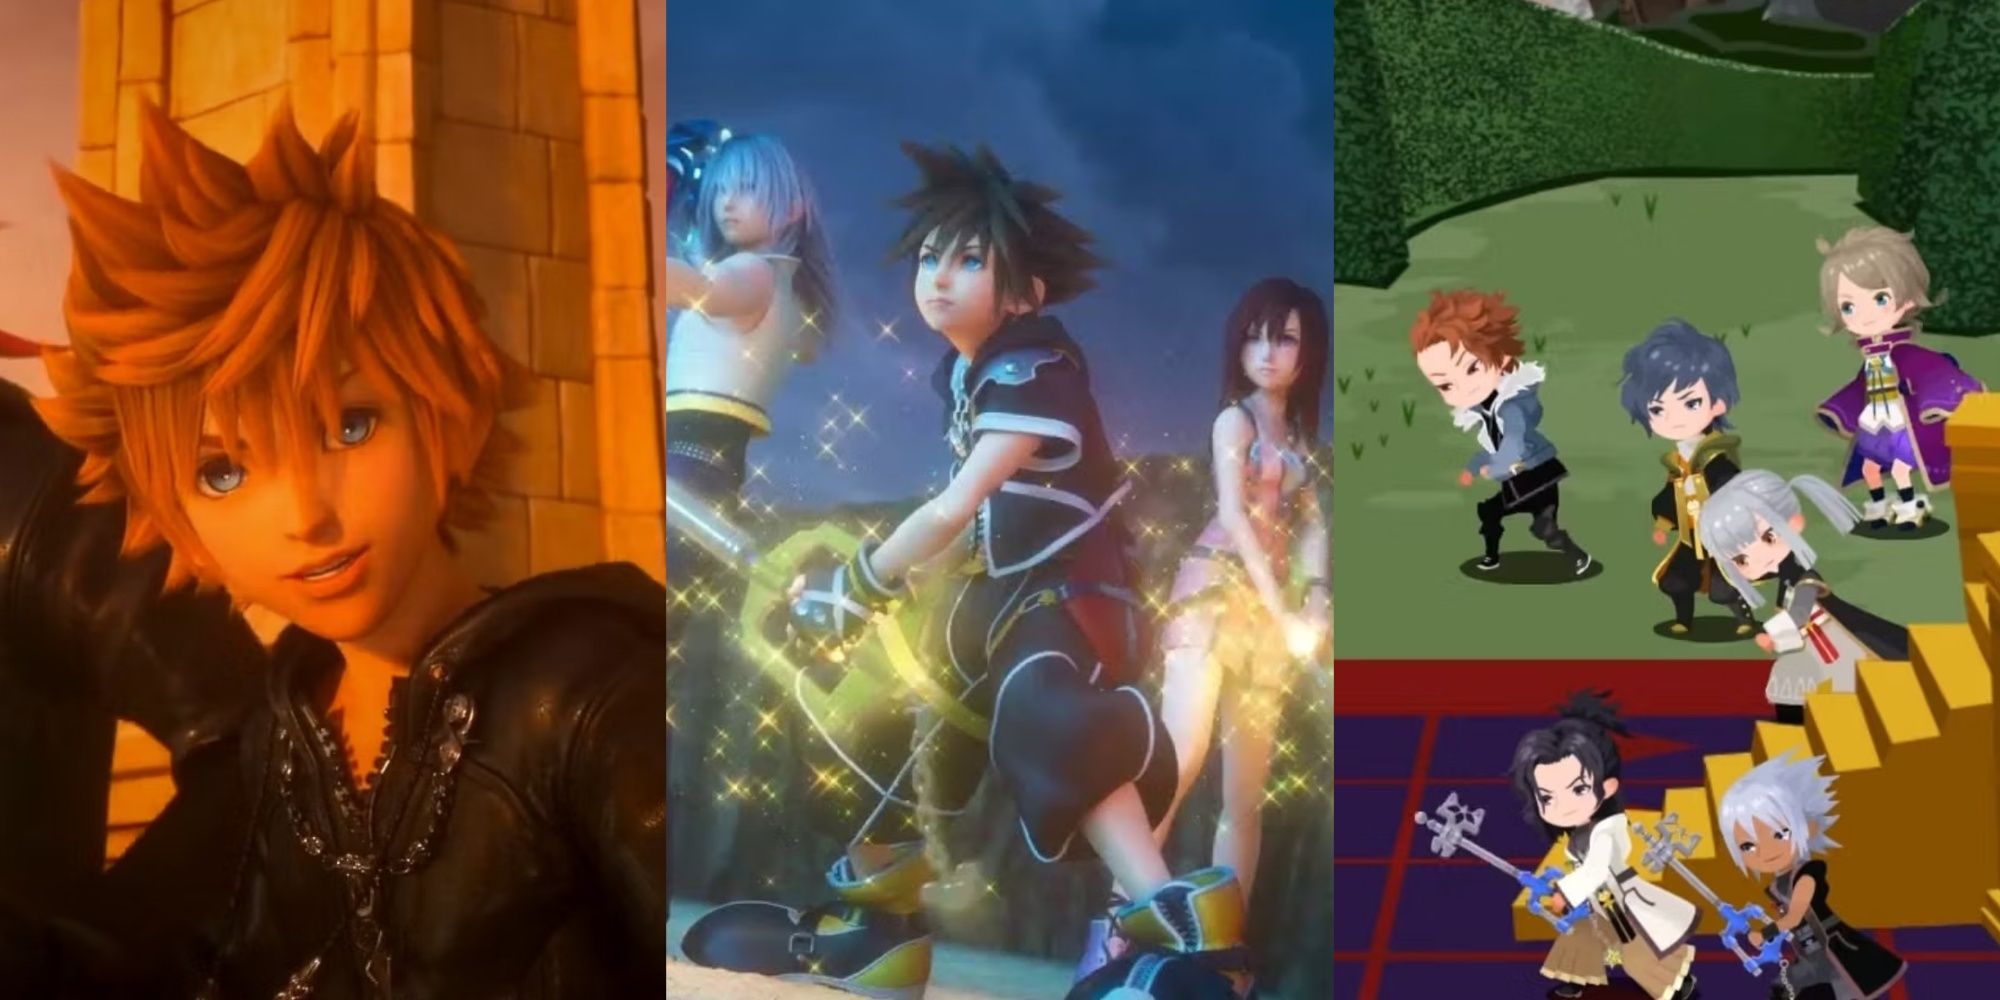 What is your Kingdom Hearts Secret Wish? Something that you dream about,  but also realize you will probably never get. My secret wish is a  completely redone Birth by Sleep. I want